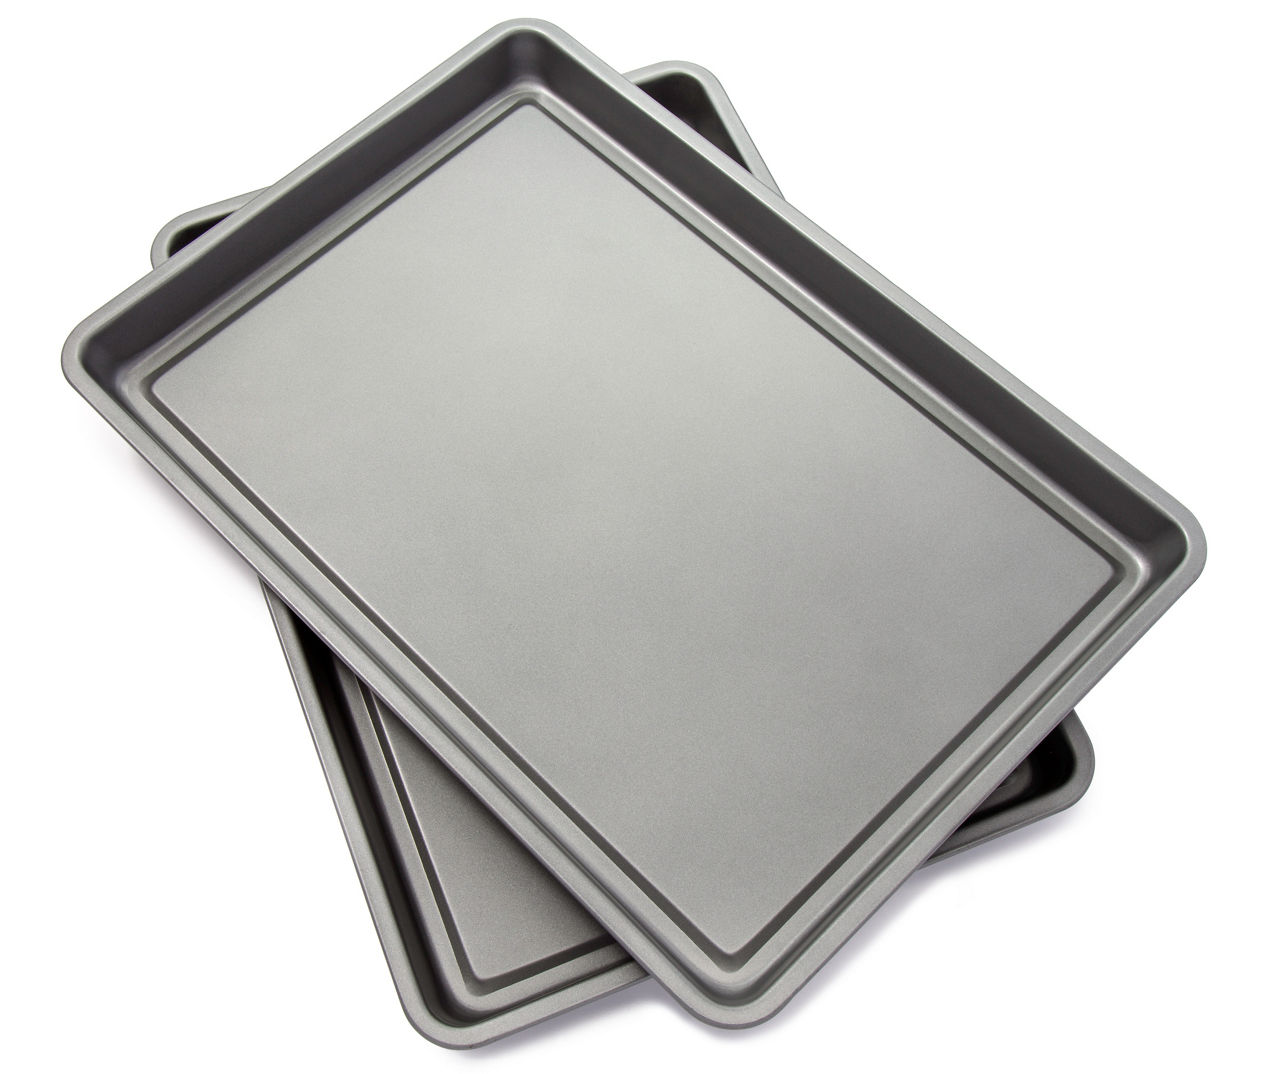 Commercial II Large Jelly Roll Pan